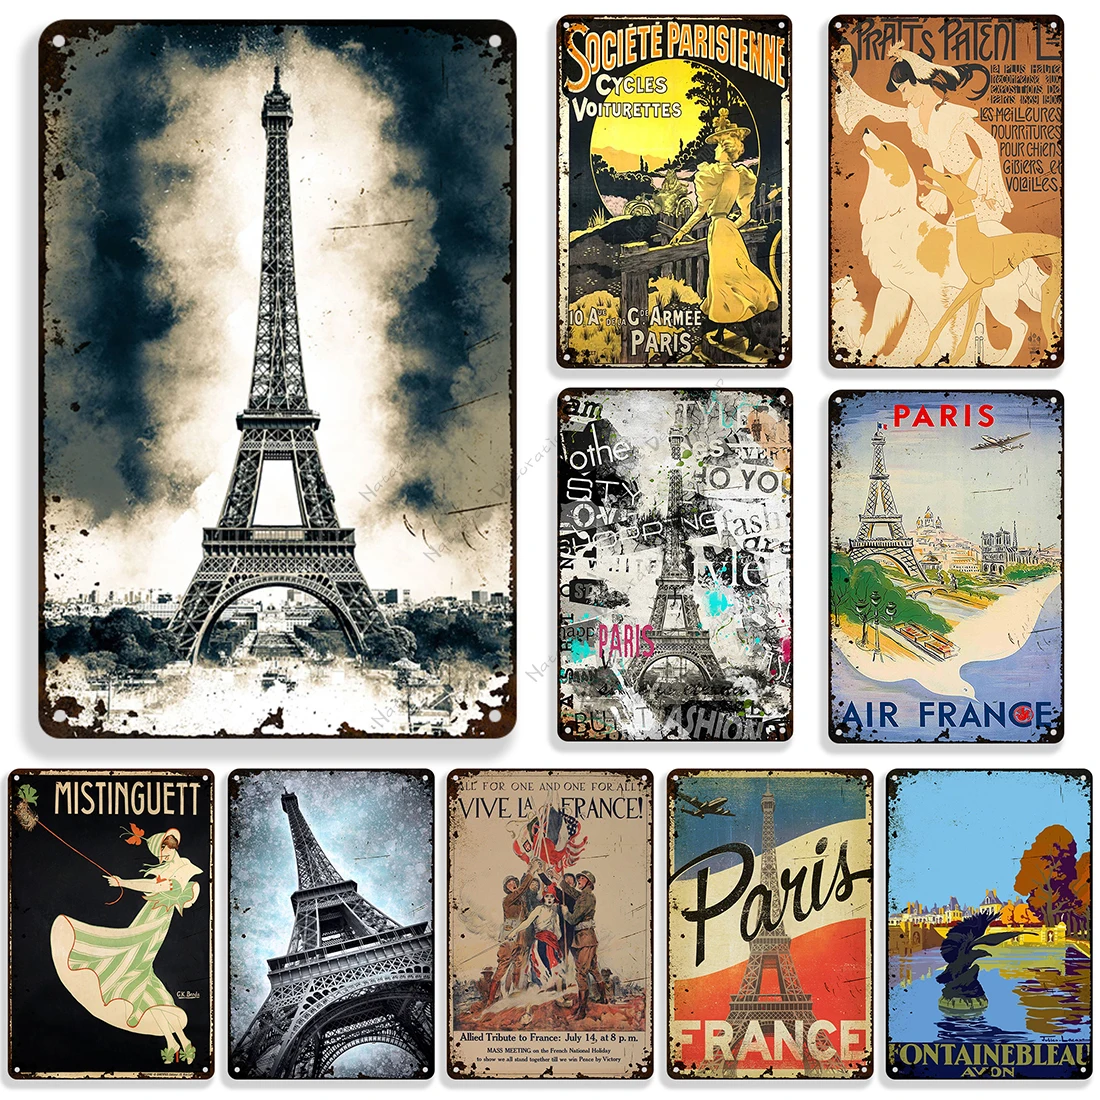 

France Poster Travel Metal Poster Eiffel Tower Decorative Sign Paris Retro Metal Sign Wall Plate Home Garage Industrial Decor